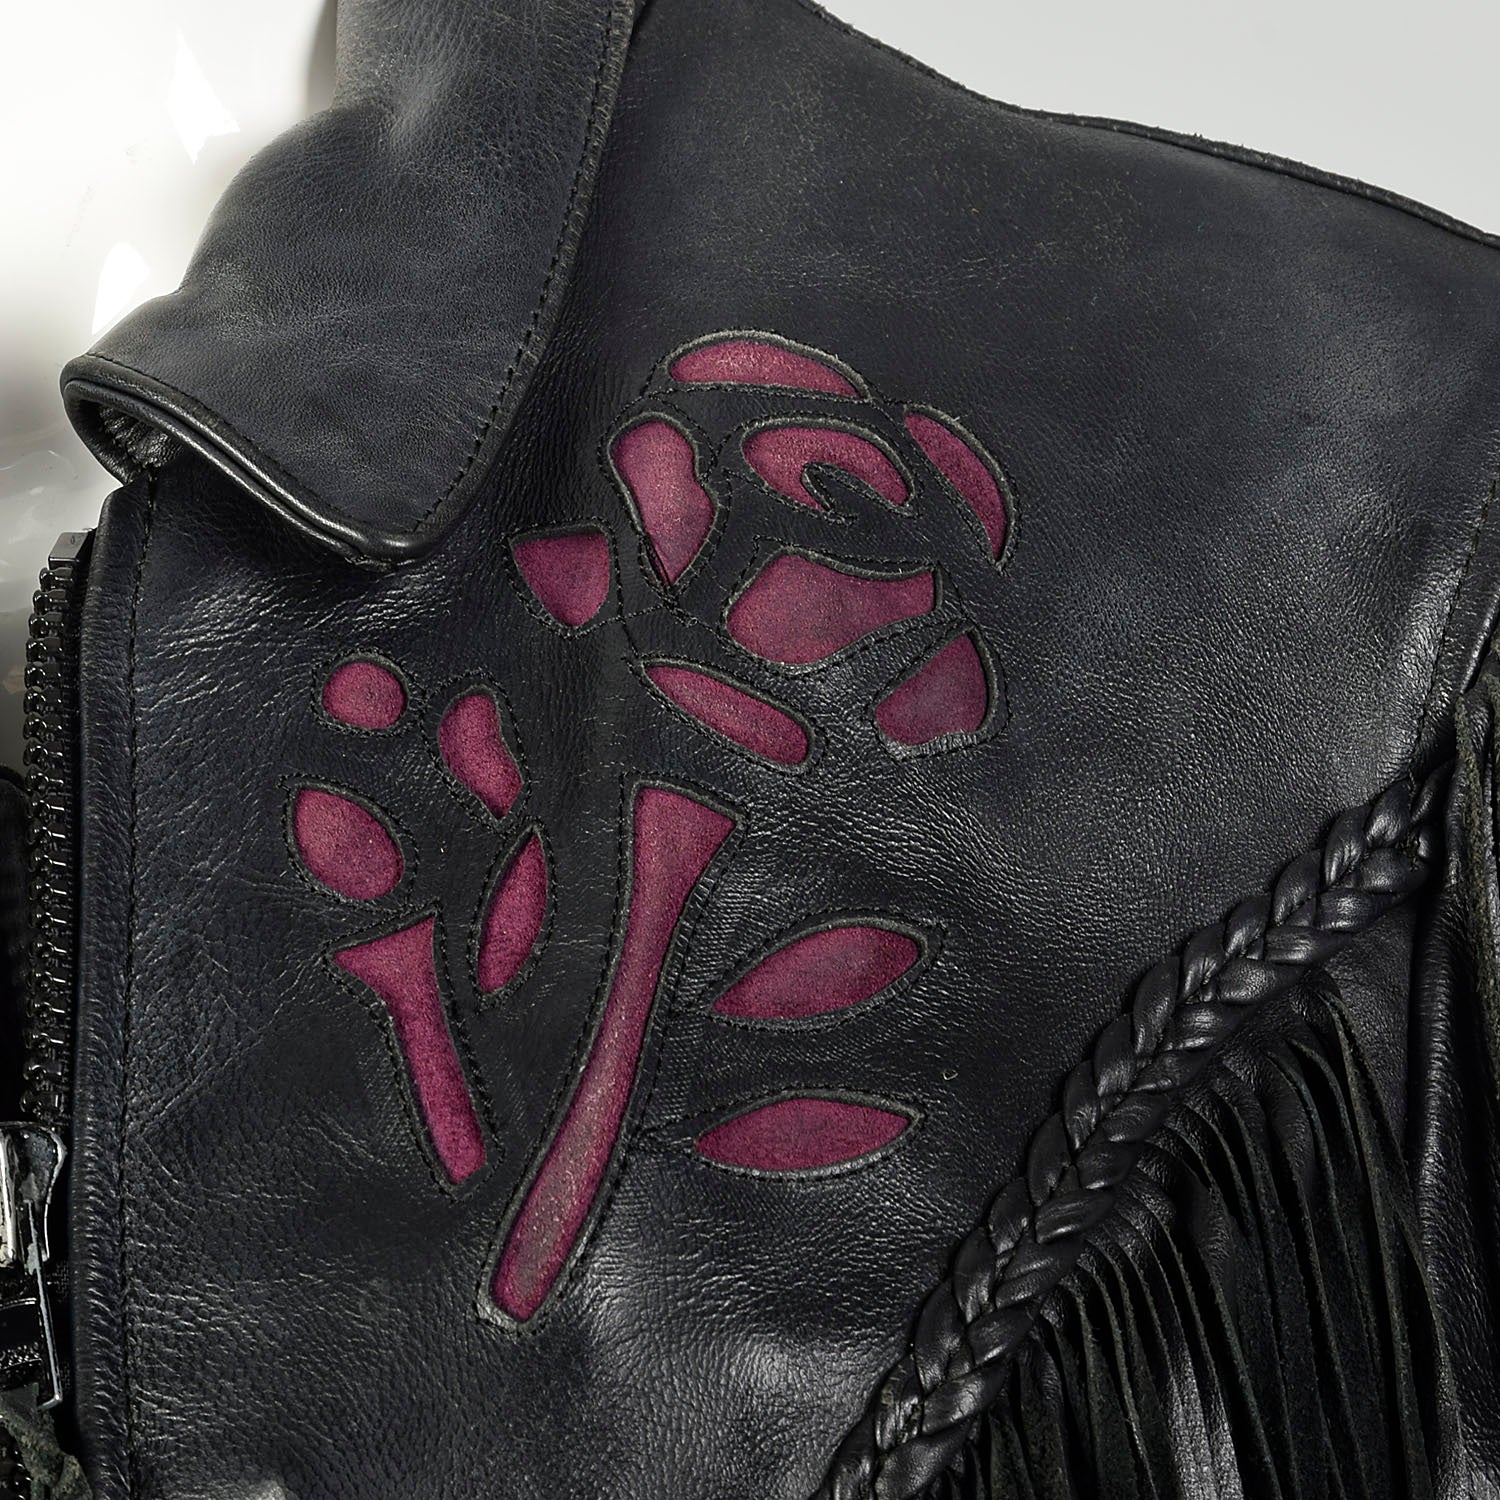 Small 1980s Black Leather Biker Jacket Fringe Purple Rose Inlays Zip Out Lining